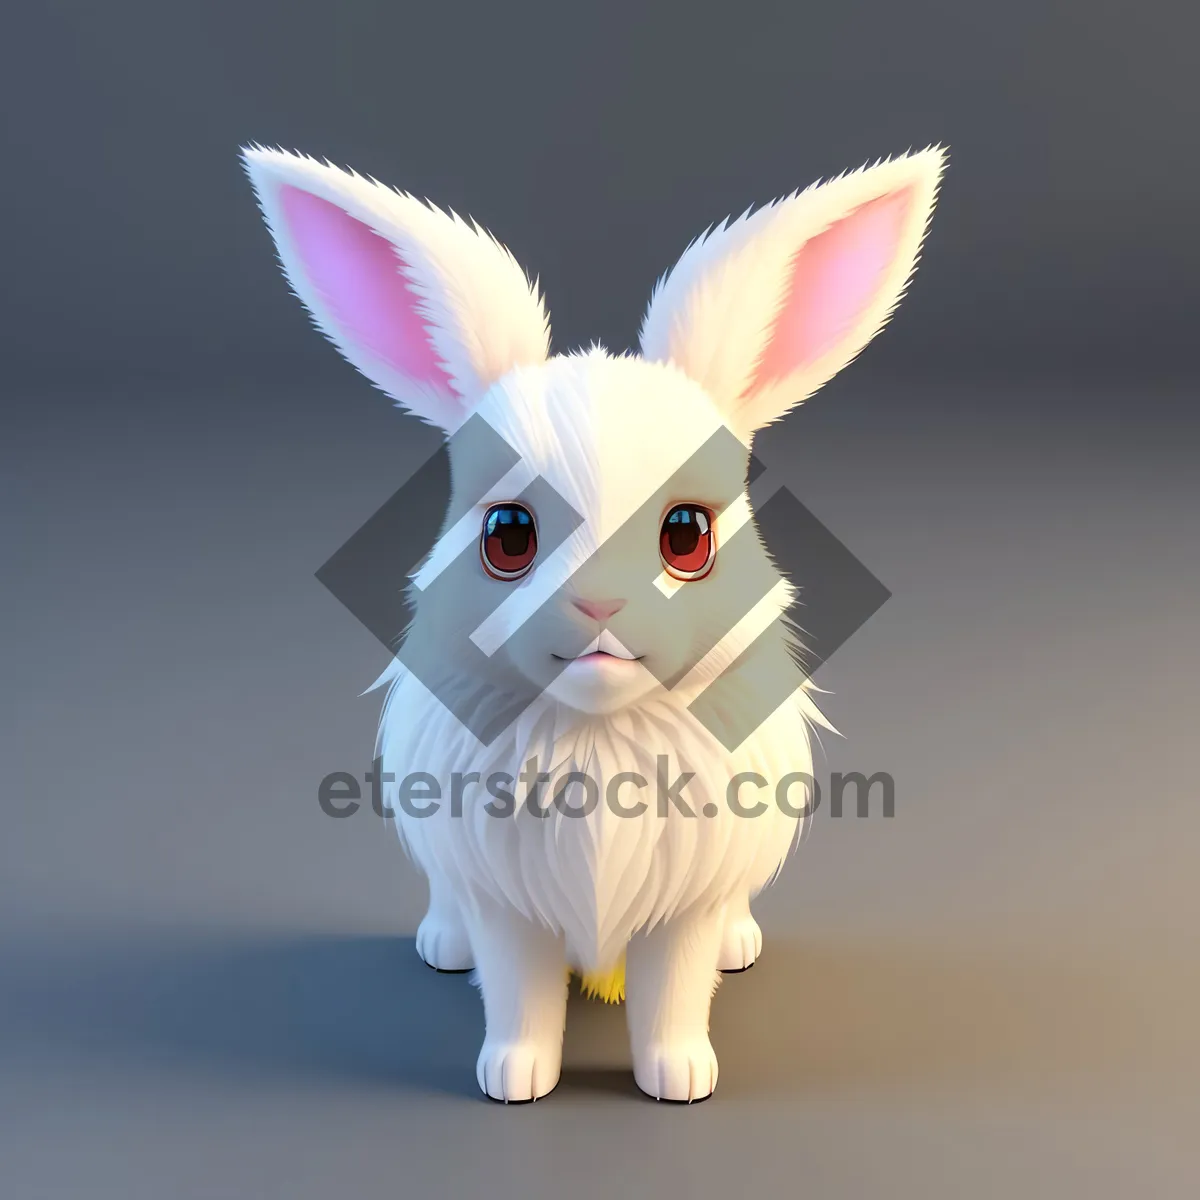 Picture of Cute Bunny in a Studio